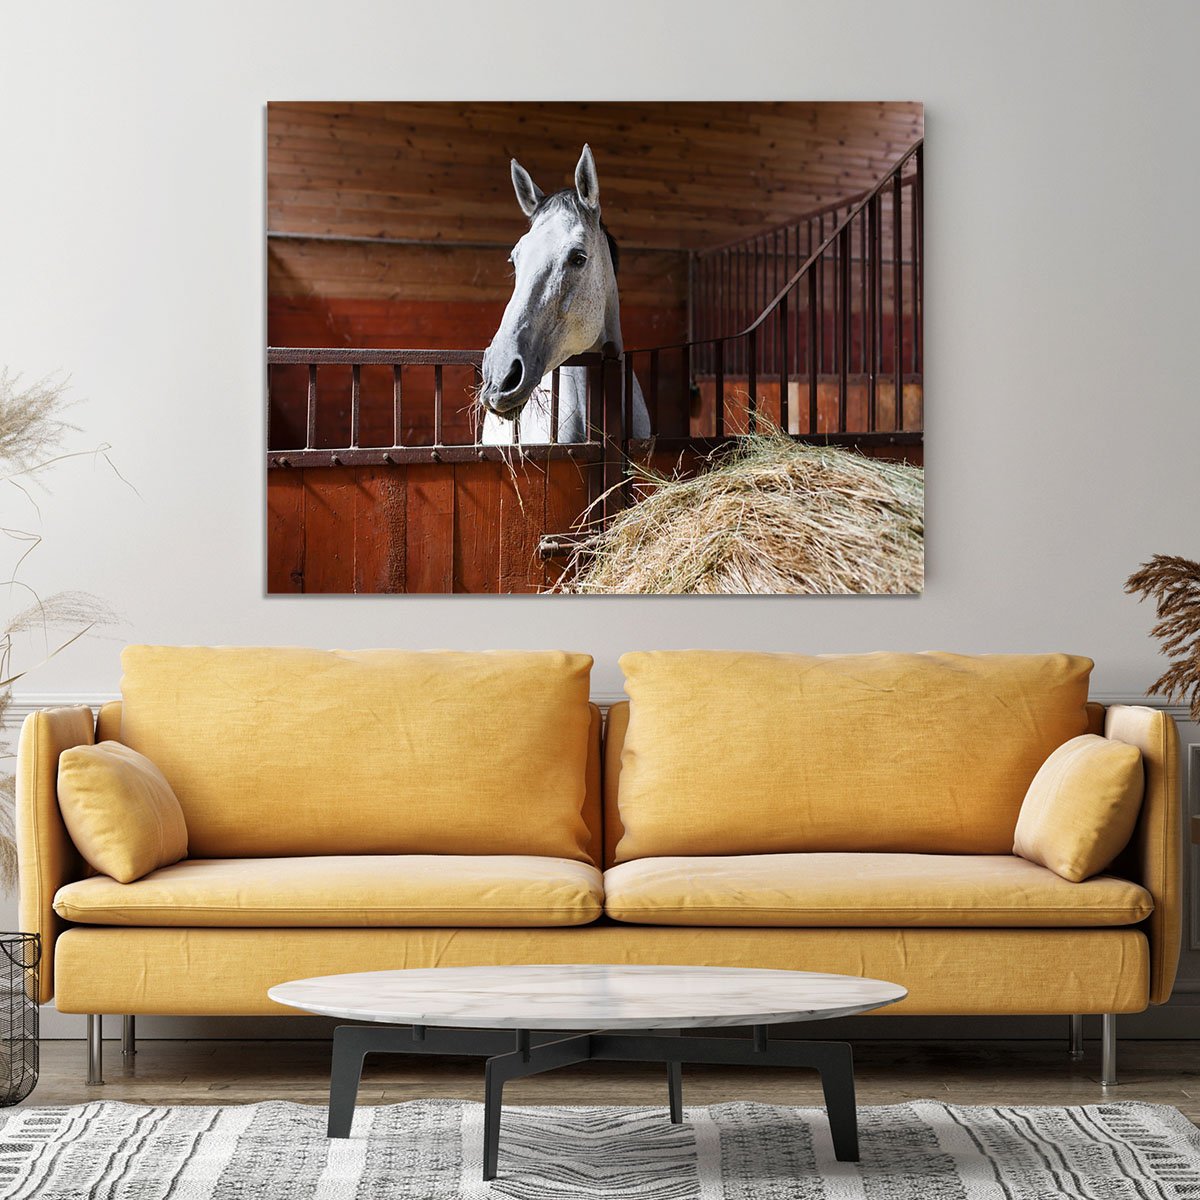 White horse eating hay in the stable Canvas Print or Poster